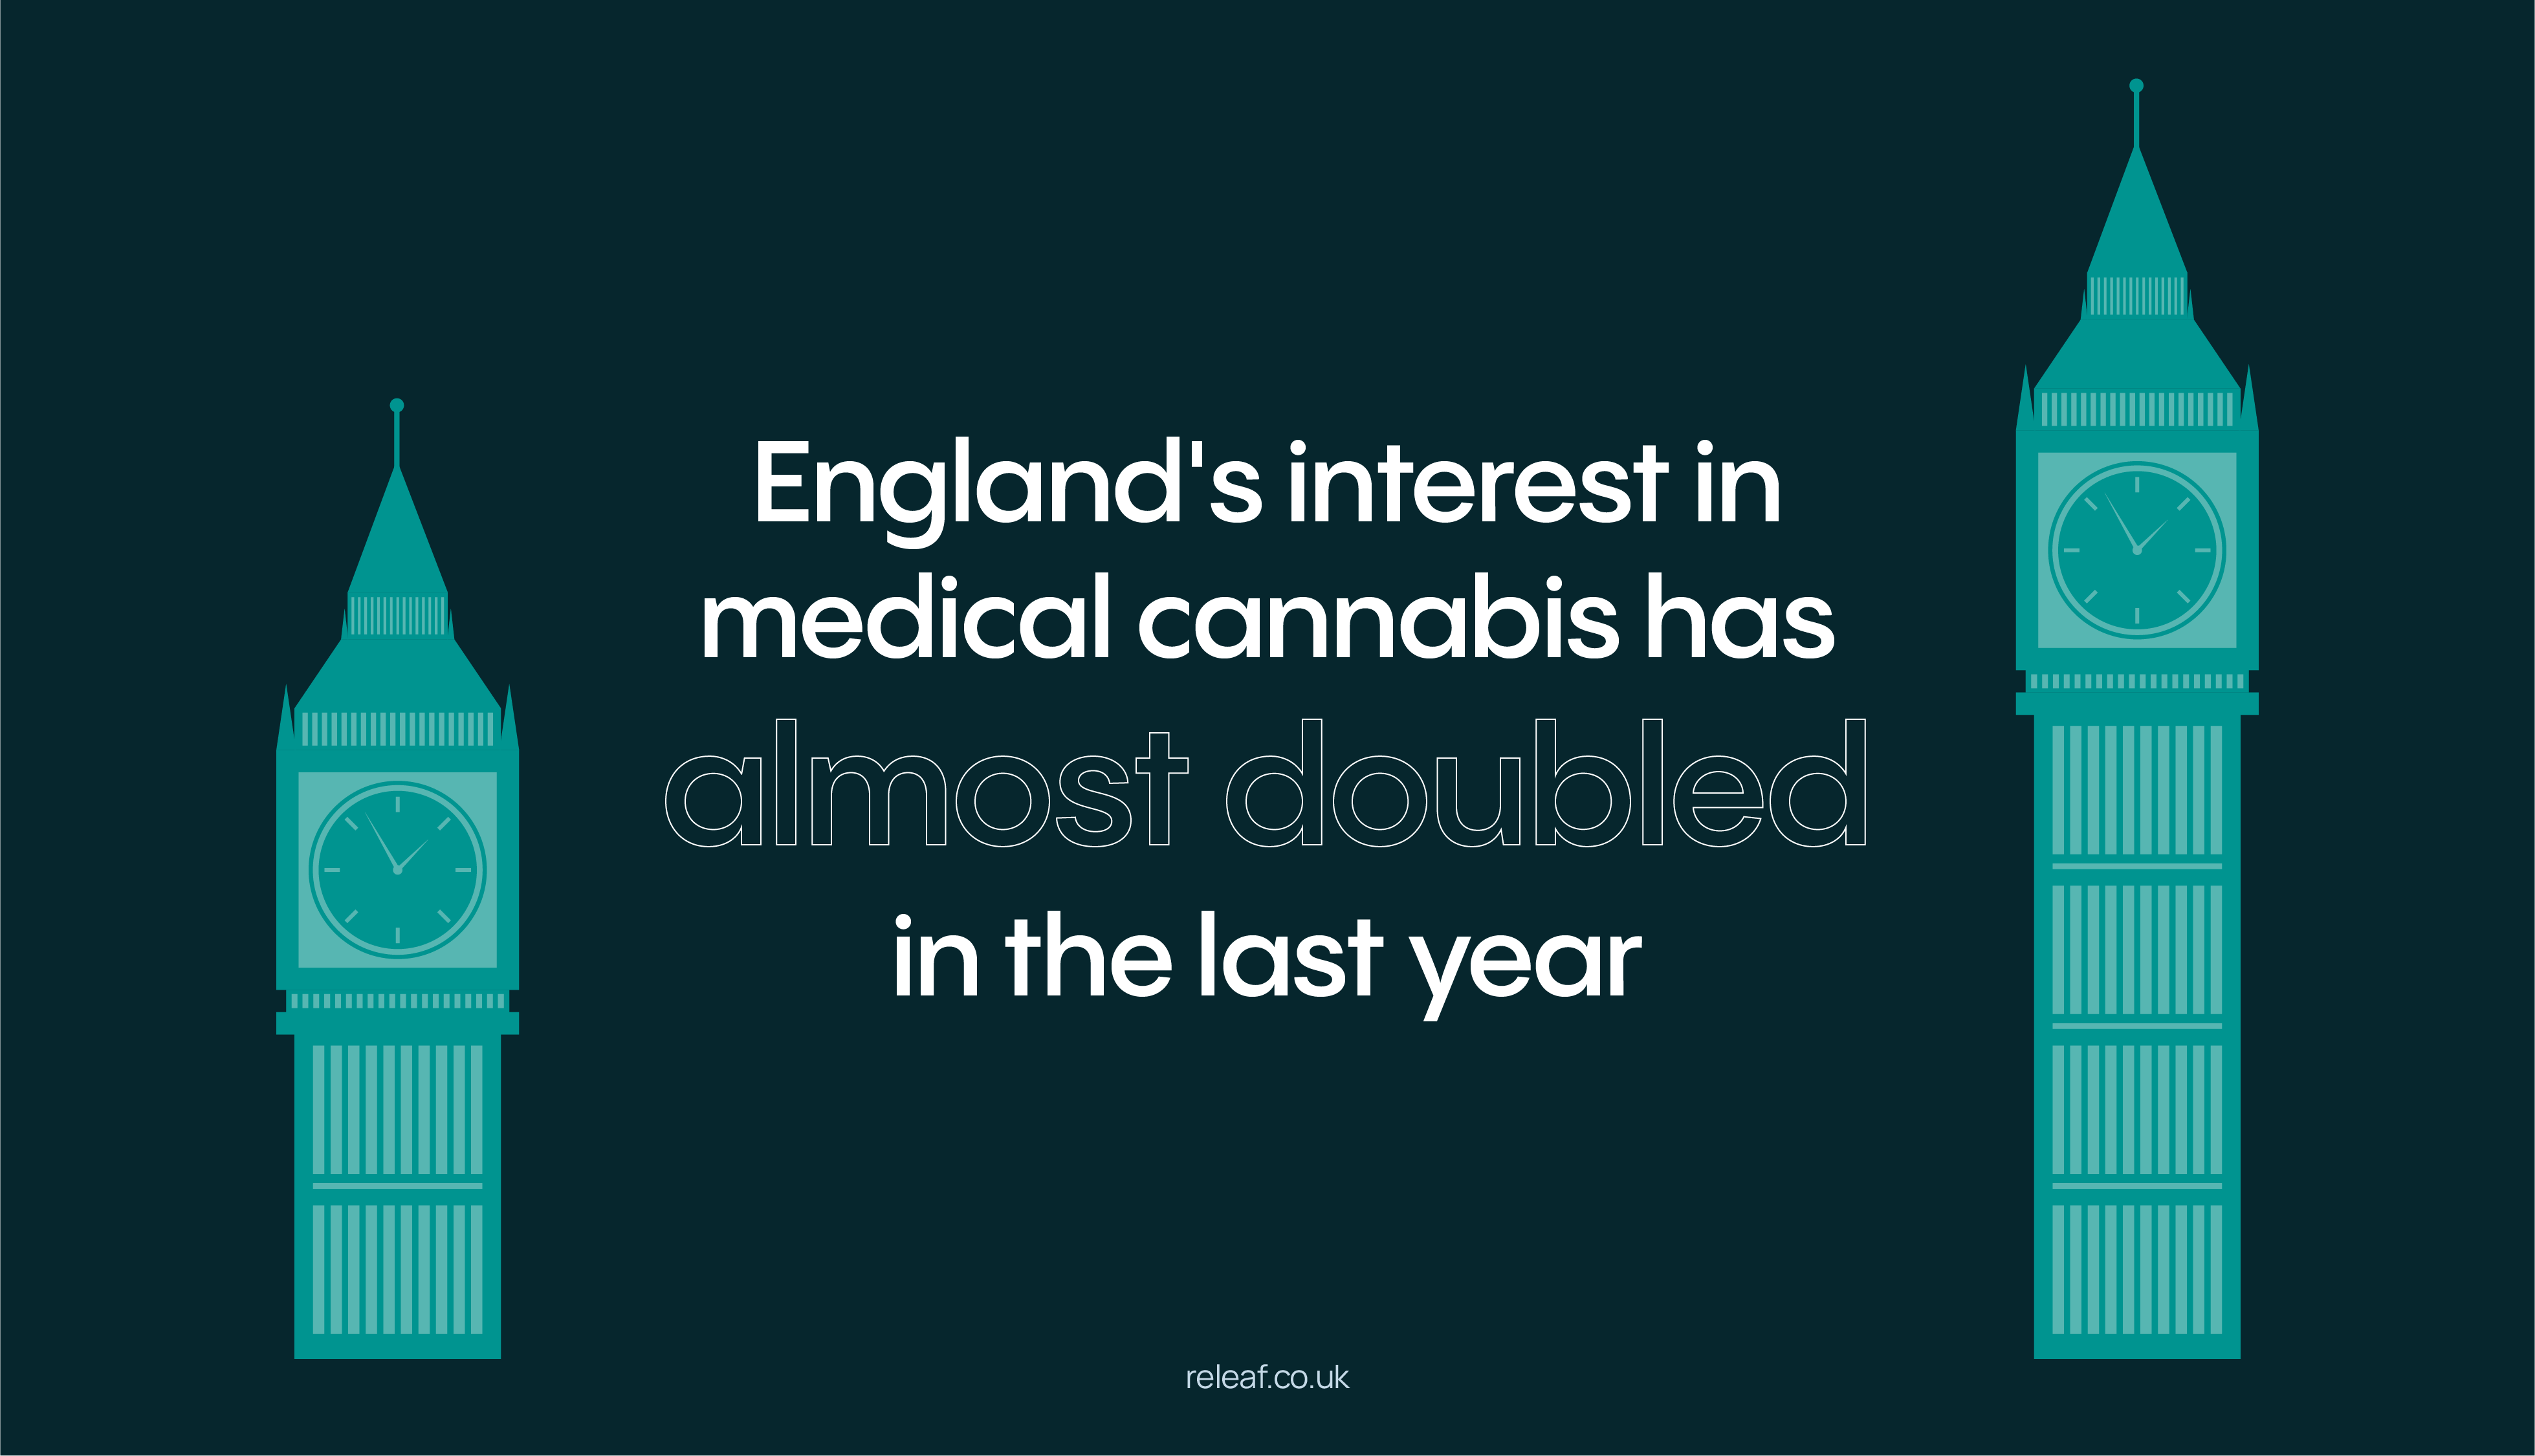 UK demand for medical cannabis has almost doubled in a year